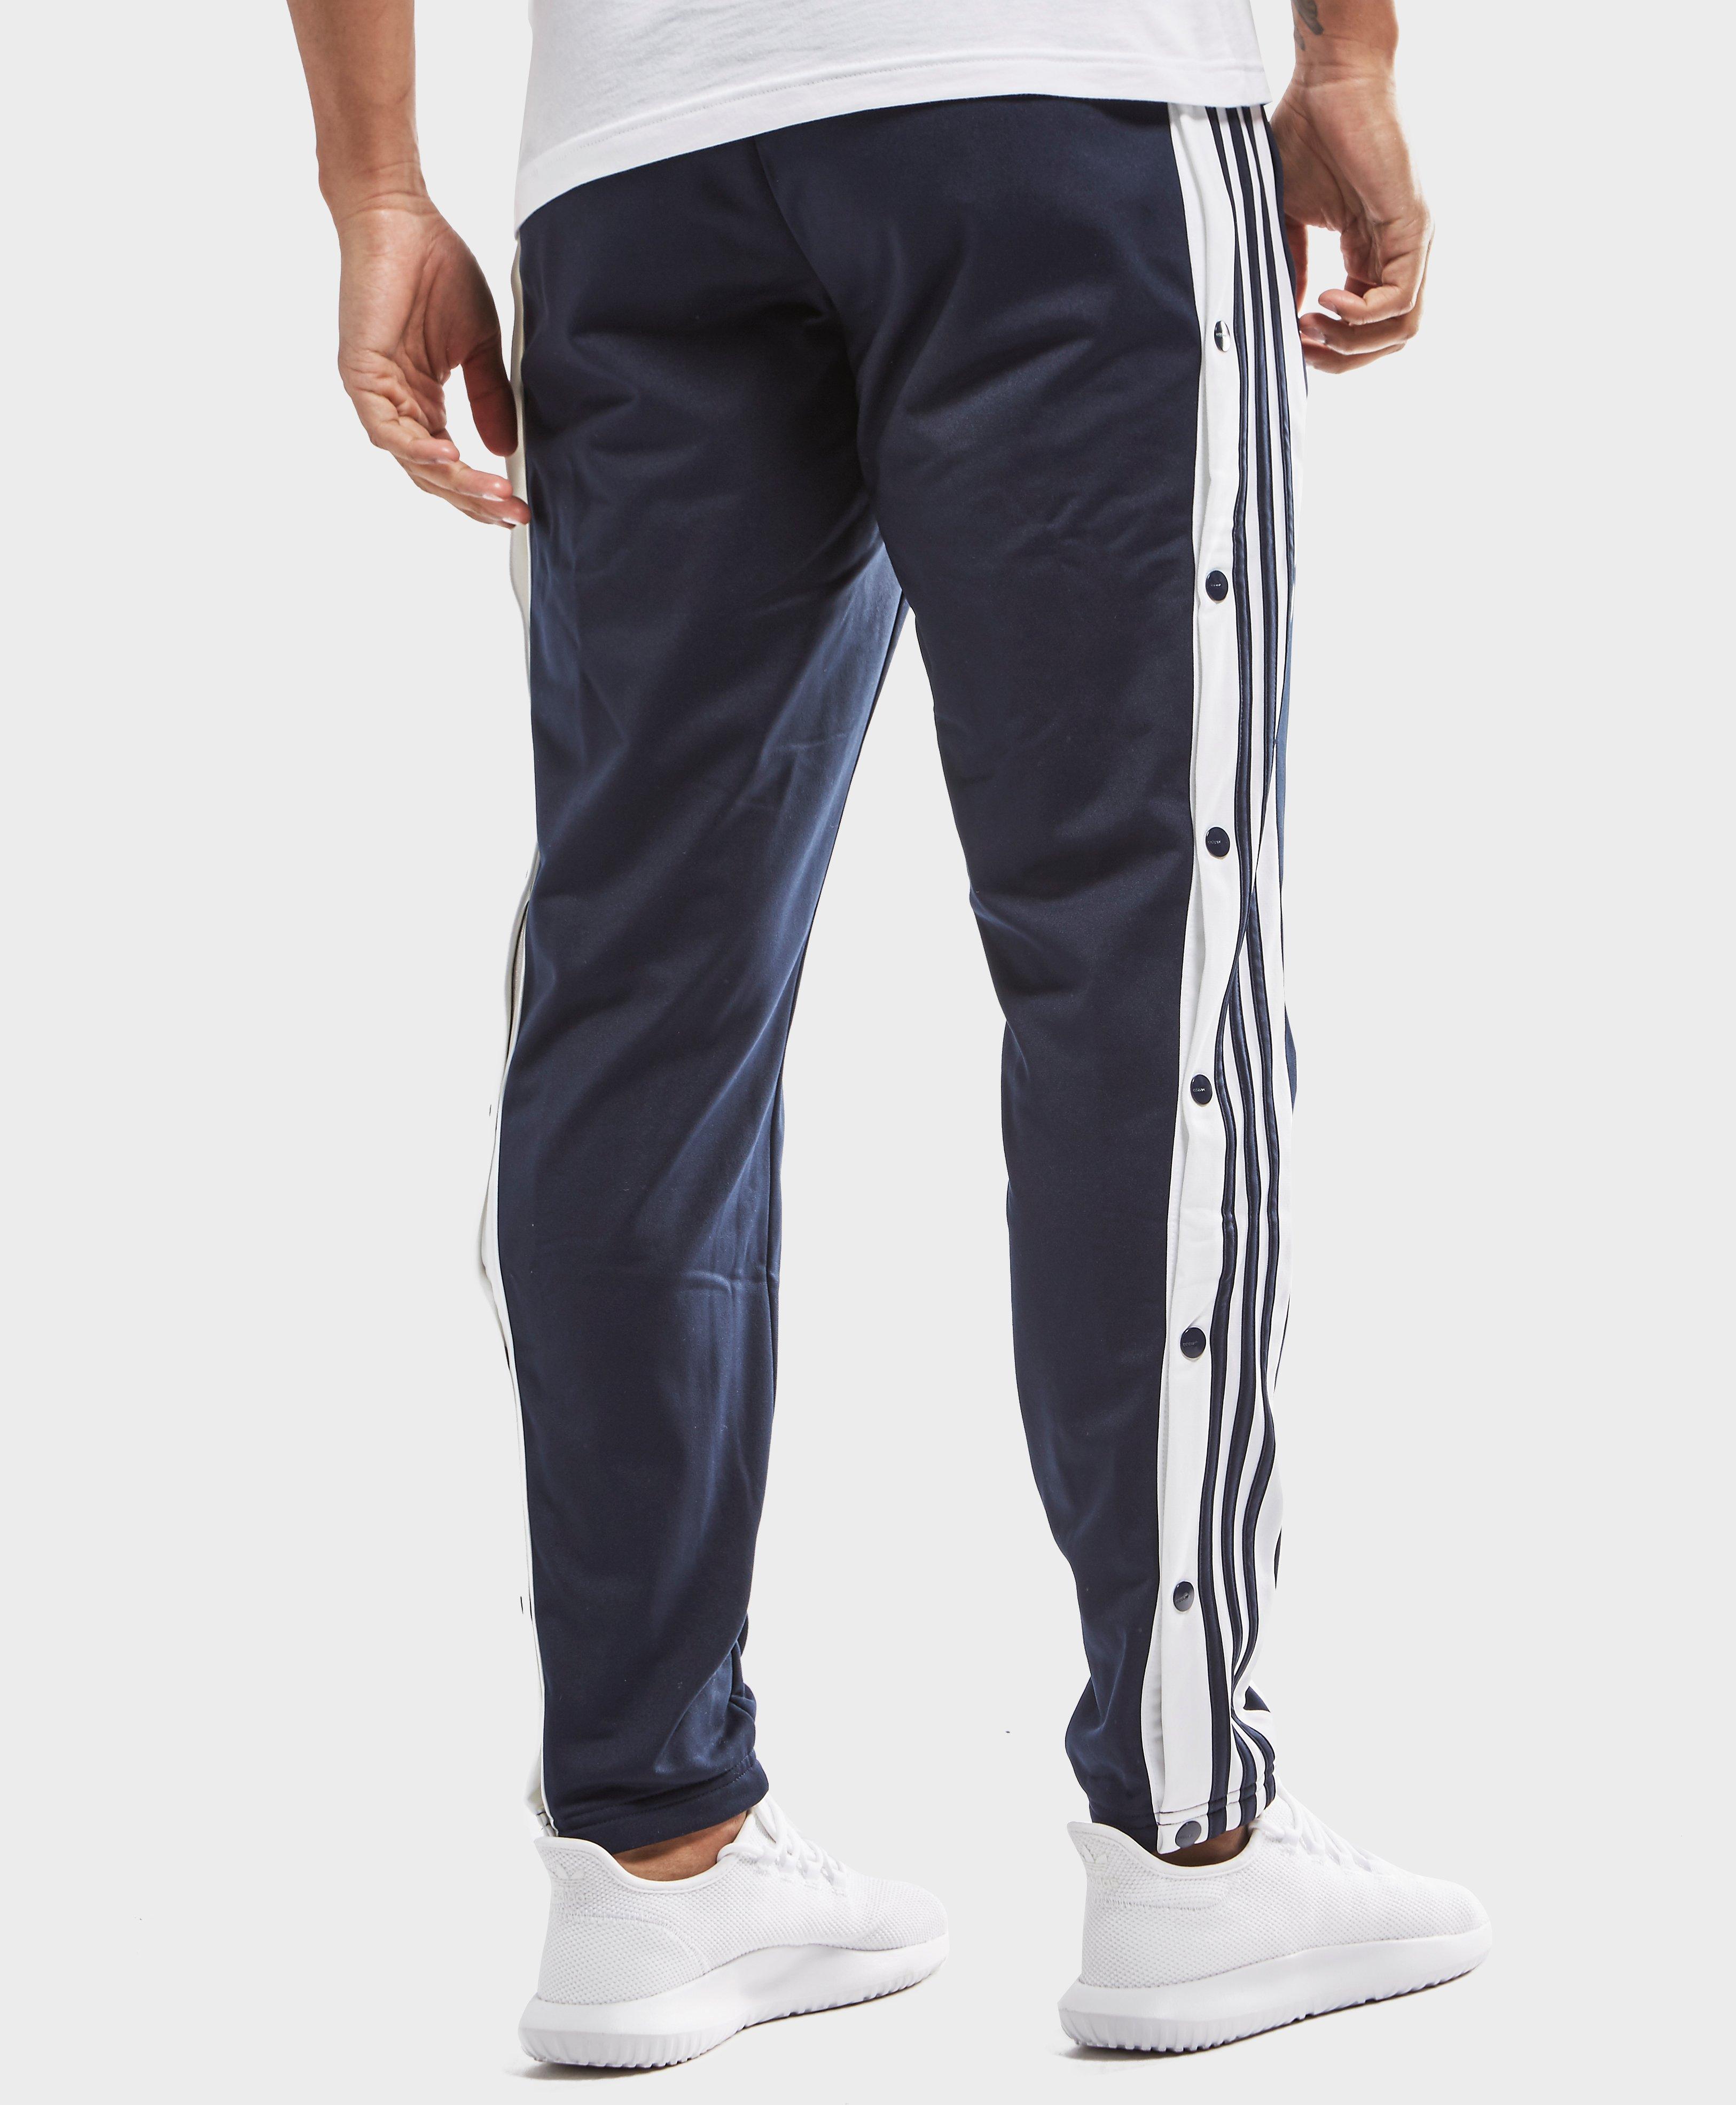 adidas poppers mens no hesitation!buy now!